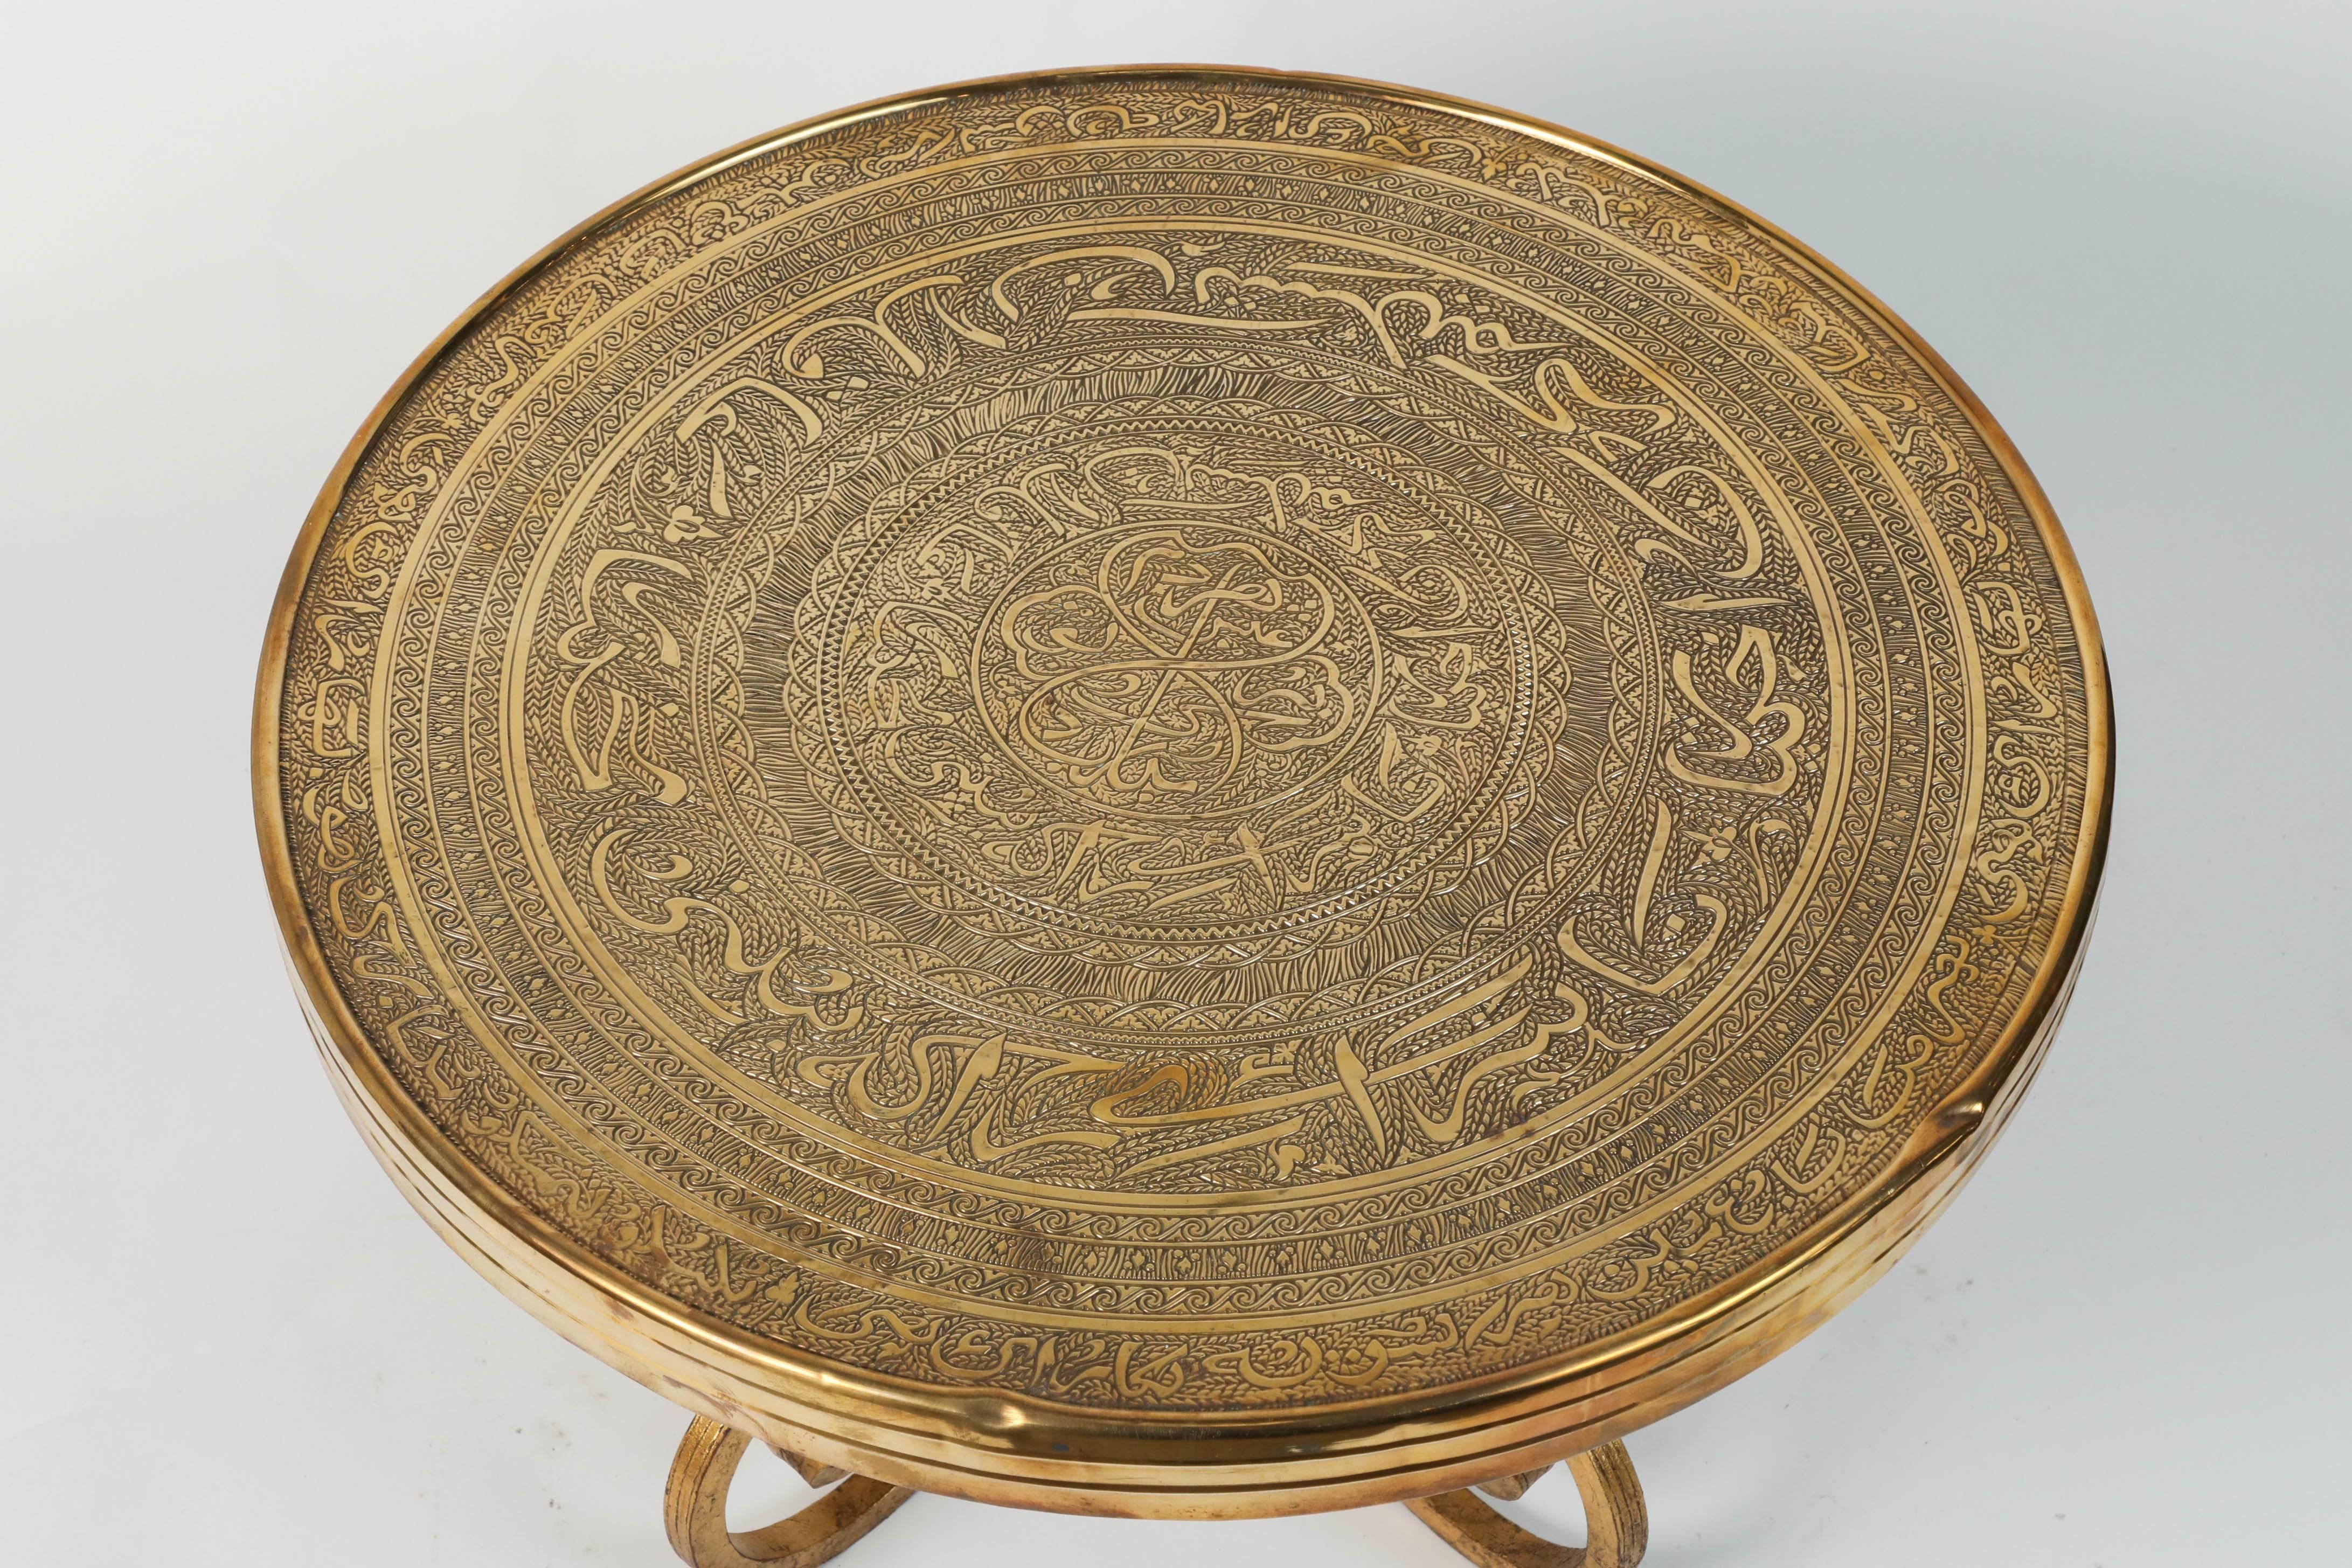 Middle Eastern Moorish antique brass repousse tray table with gilt iron stand.
The embossed Art Deco style brass top is decorated with Arabic calligraphy writing and repousse geometric Islamic Moorish designs.
The Arabic words are poetry from the